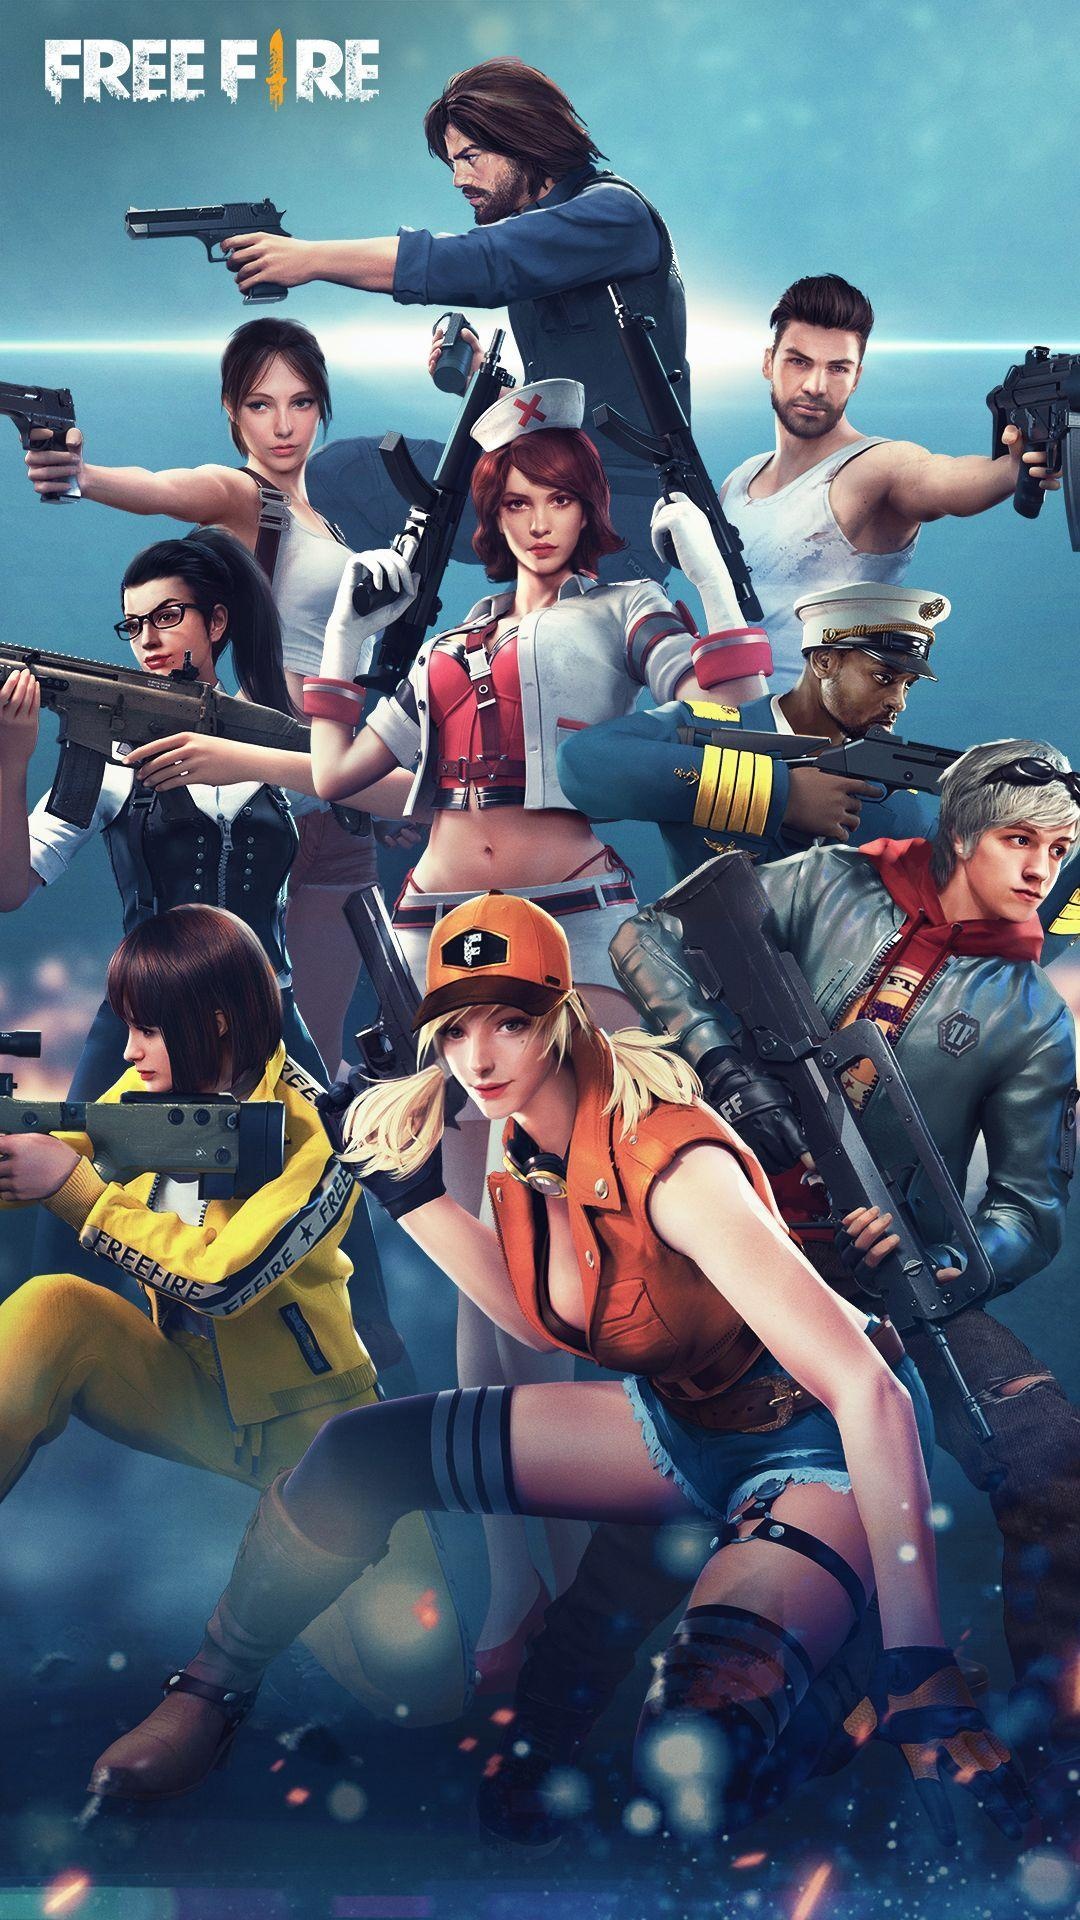 Free Fire character, Striking wallpapers, Unique abilities, Iconic poses, 1080x1920 Full HD Handy